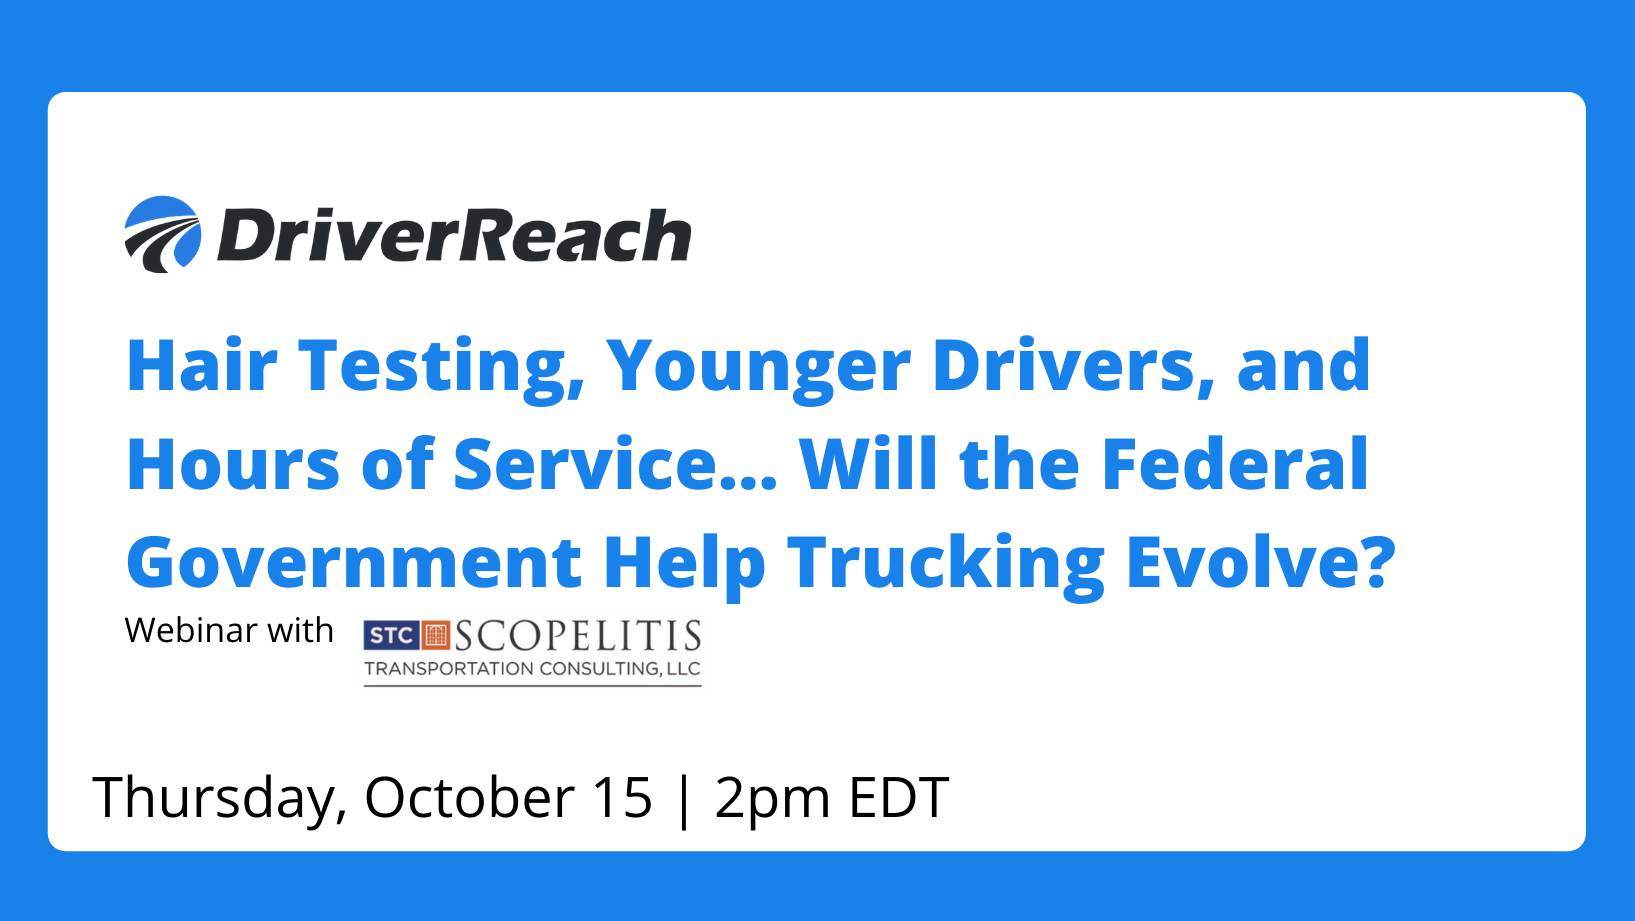 Upcoming Webinar: “Hair Testing, Younger Drivers, and Hours of Service… Will the Federal Government Help Trucking Evolve?”